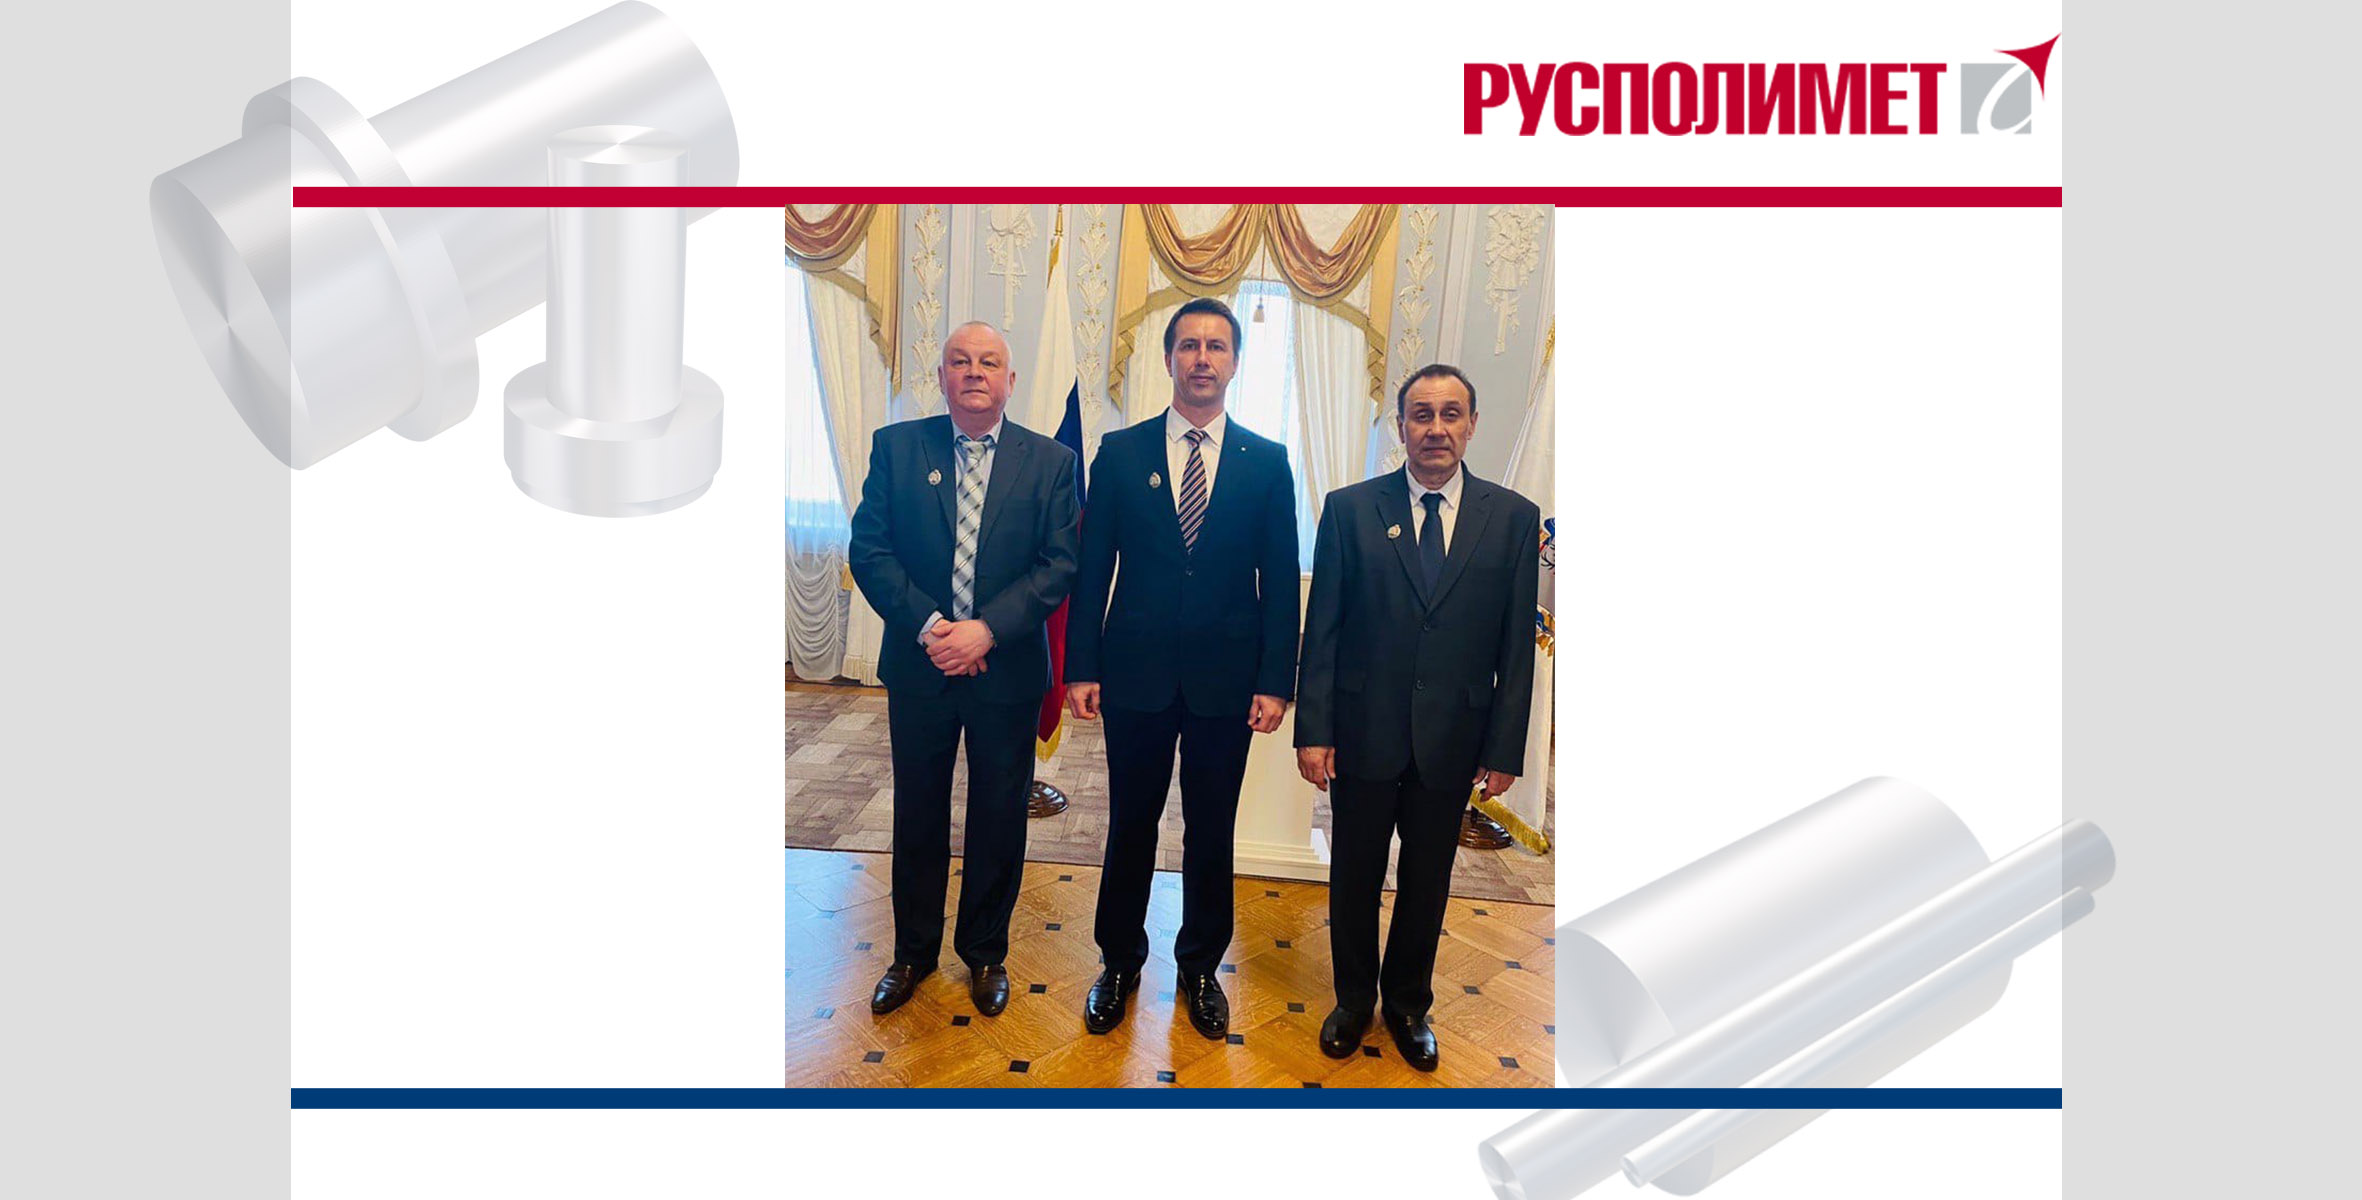 Three plant workers were awarded the title "Honoured Metallurgist of the Russian Federation" by Russian President Vladimir Putin